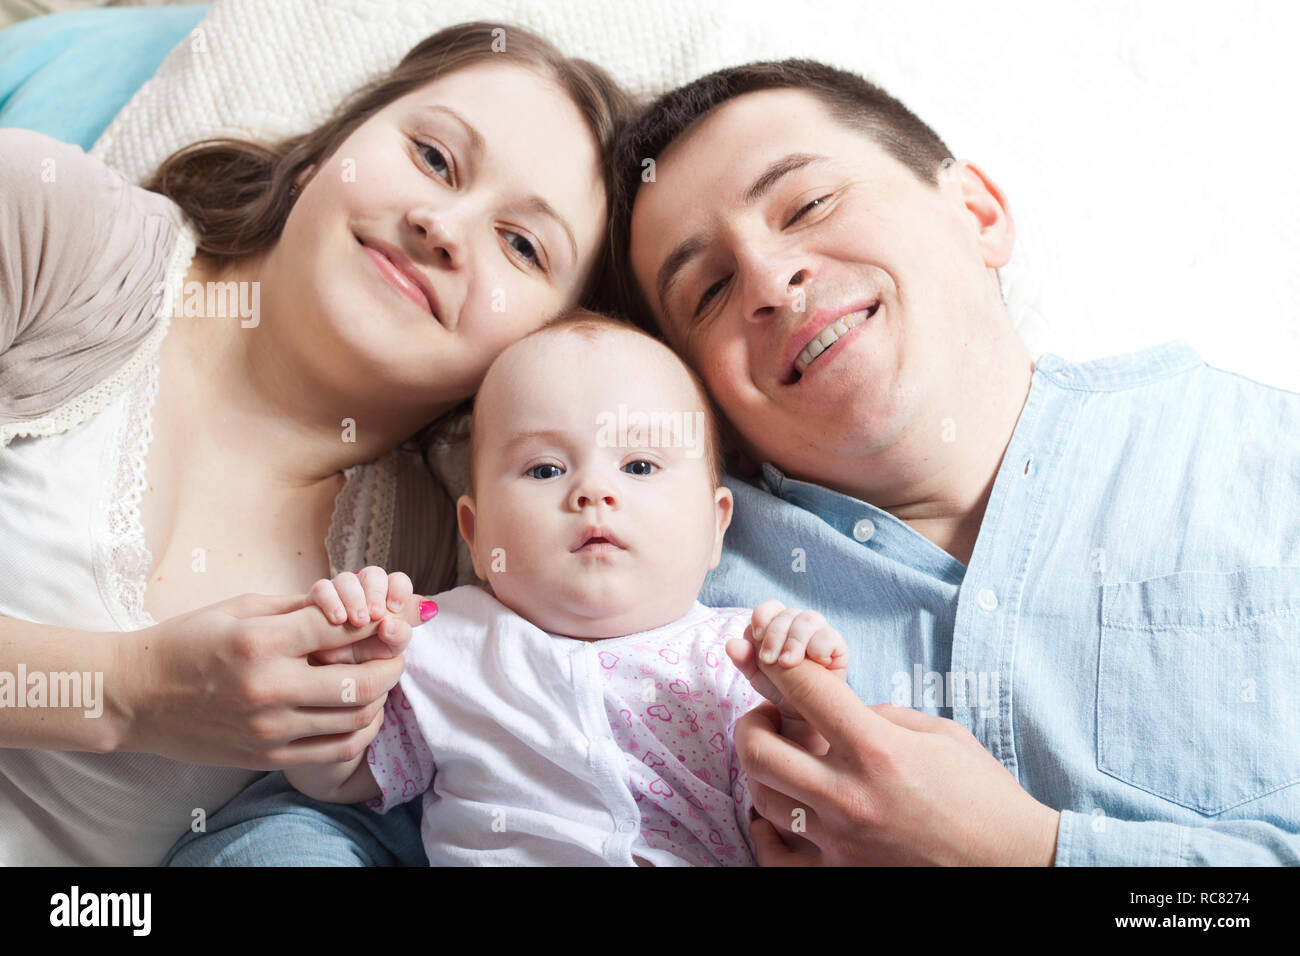 Family concept - baby with dad and mom. Portrait of happy young parents with baby in the bed at home. Stock Photo